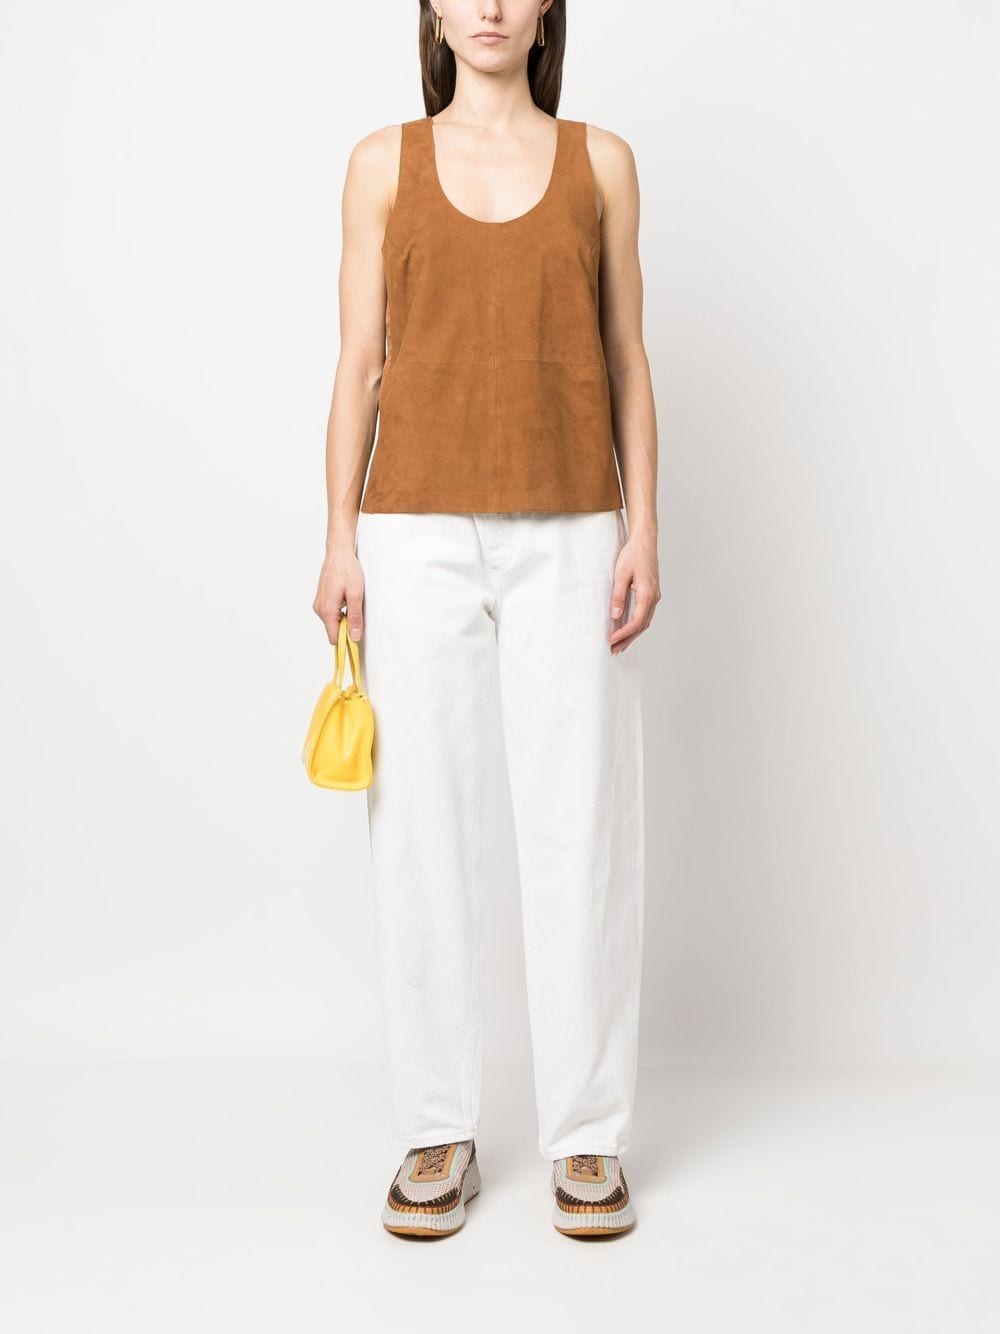 Image 2 of STAND STUDIO tan suede tank top